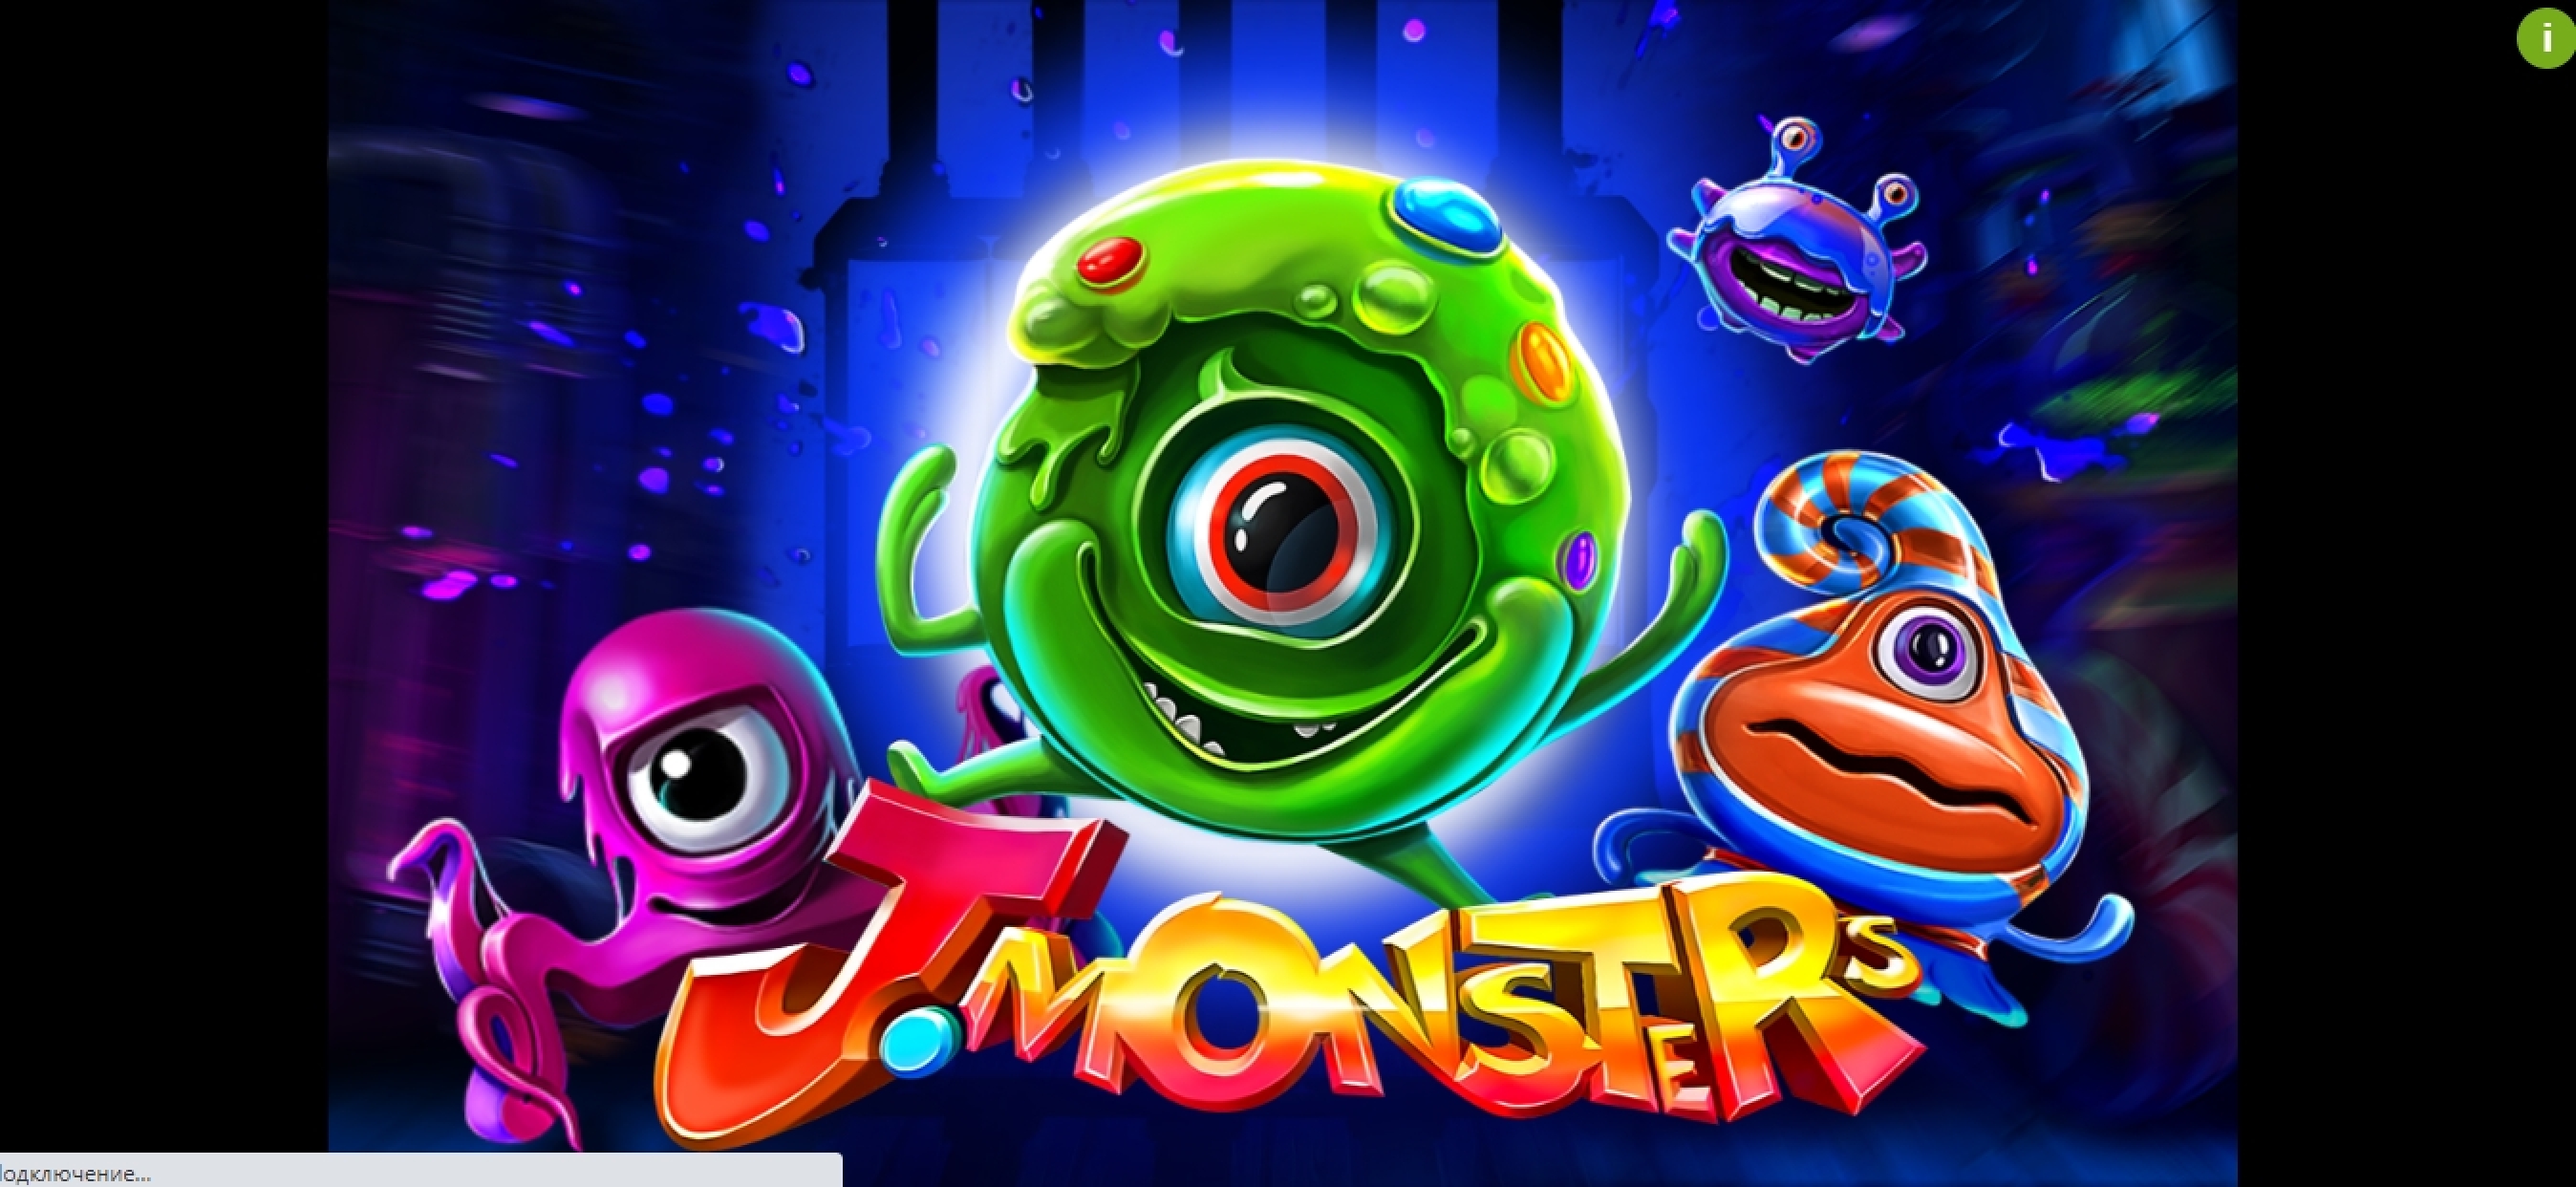 Play J. Monsters Free Casino Slot Game by Belatra Games